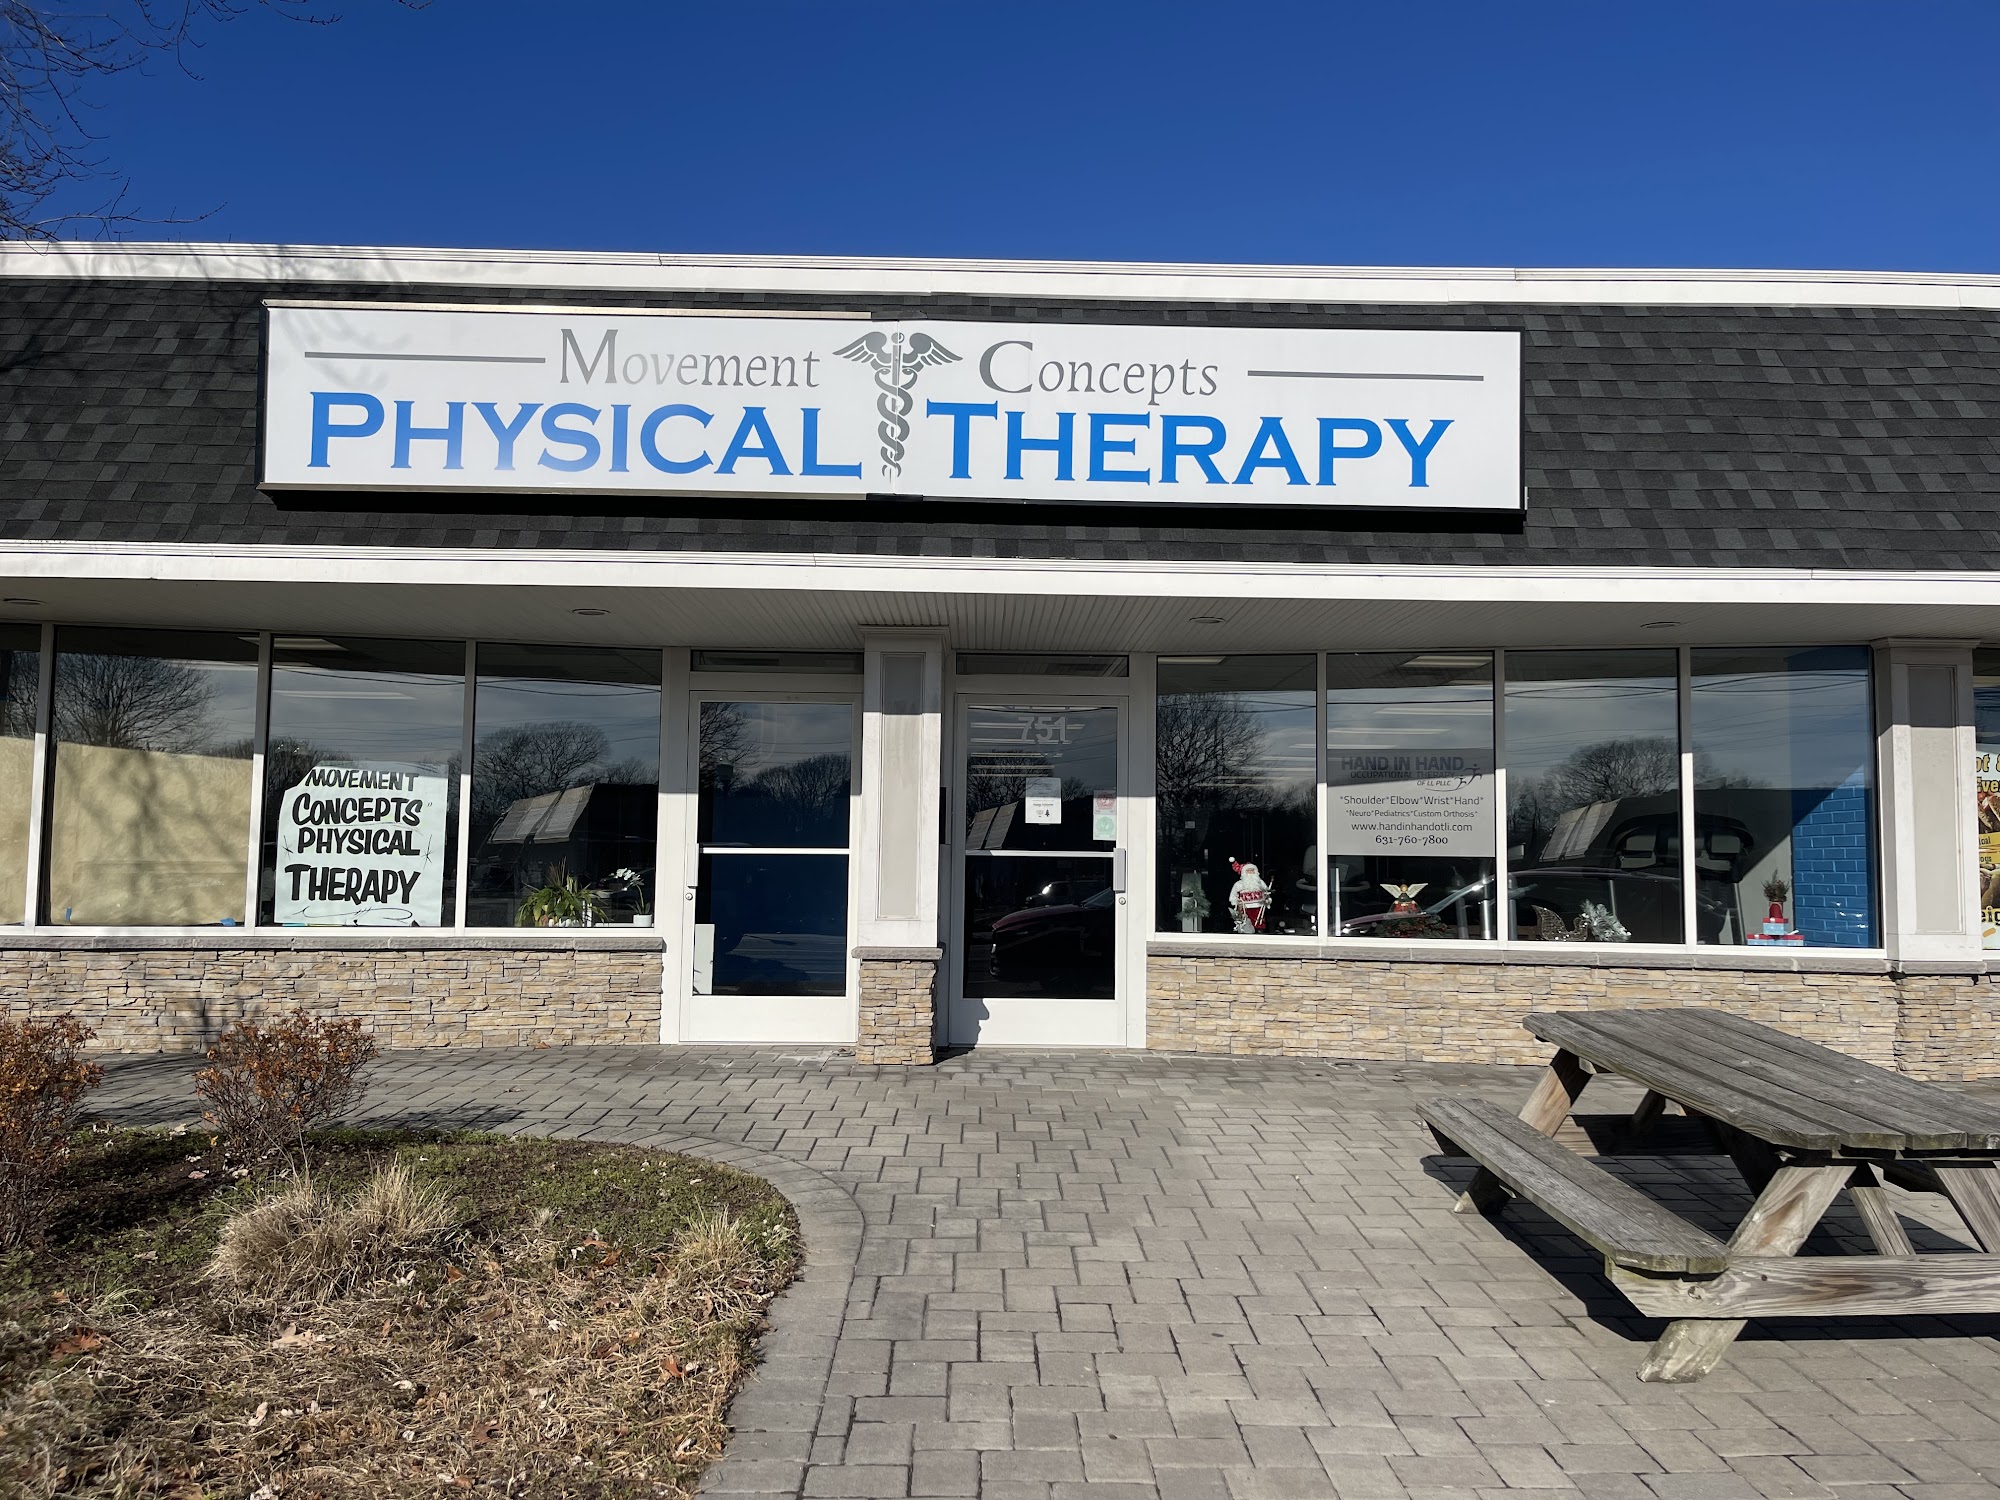 Movement Concepts Physical Therapy in Bayport 751 Montauk Hwy, Bayport New York 11705